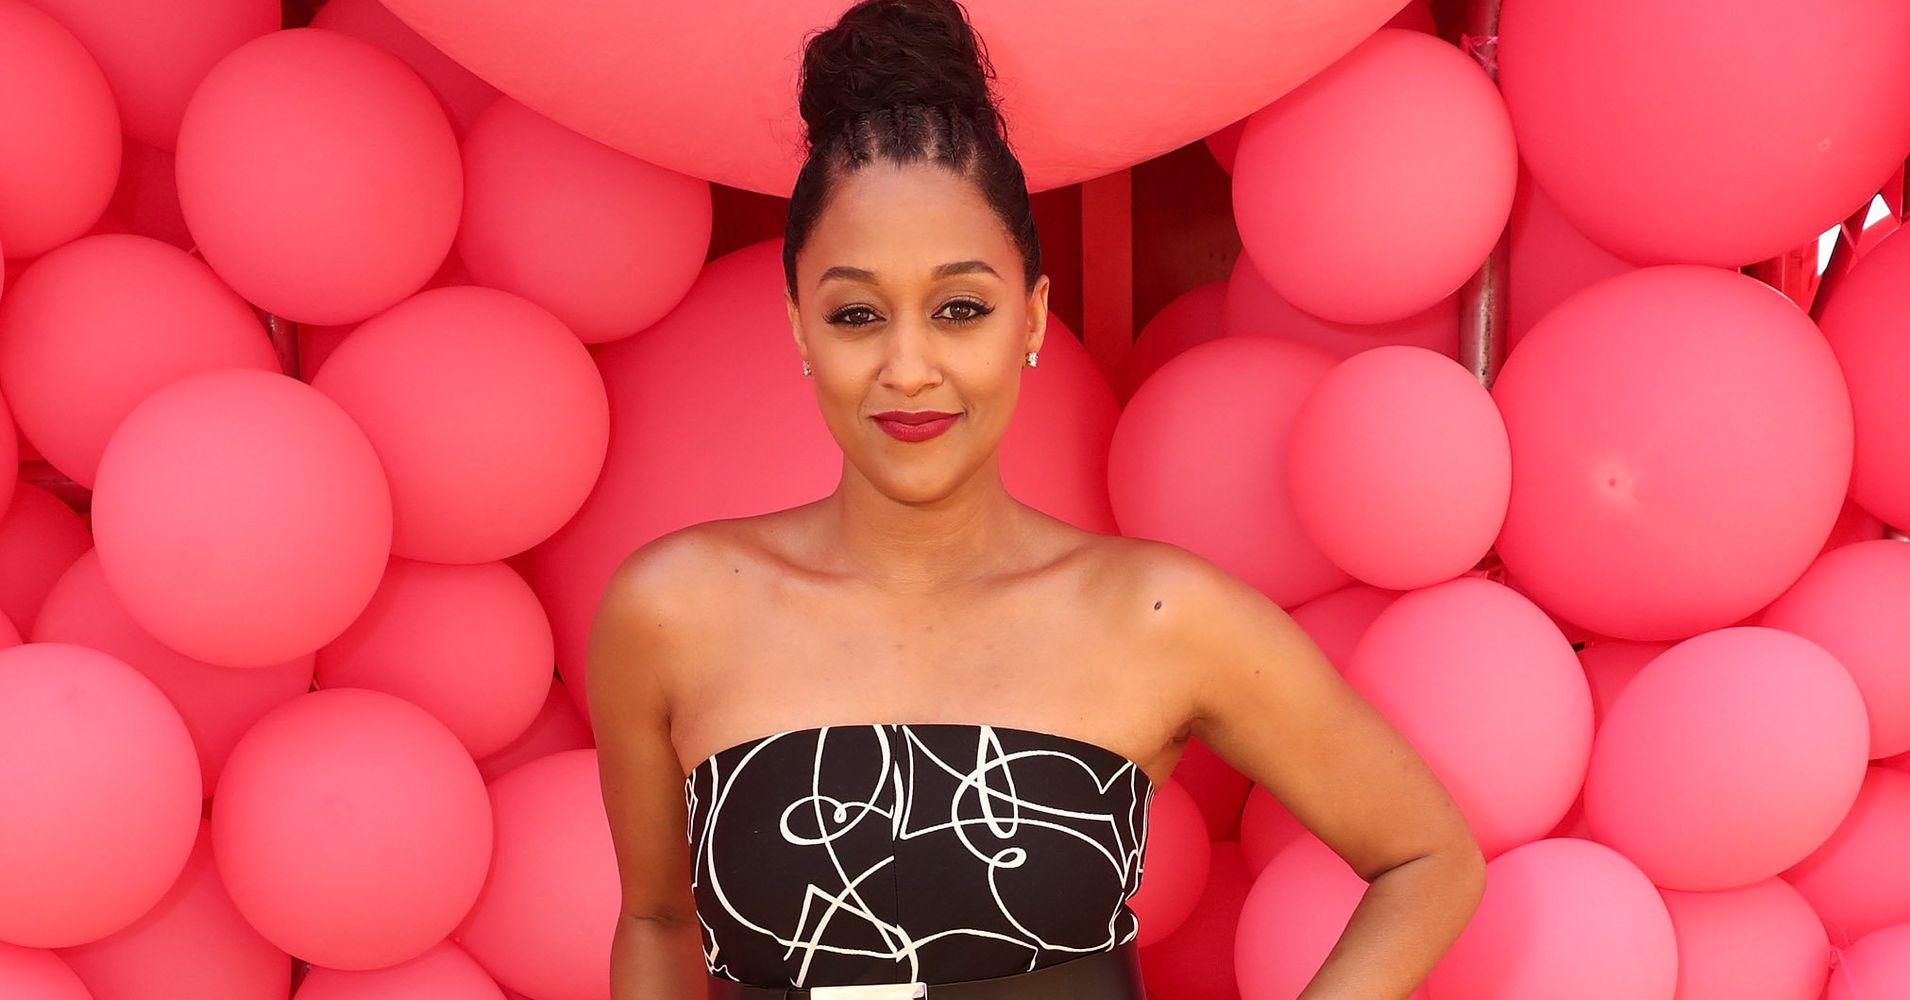 There S A Sweet Message Behind Tia Mowry S Post About Her Son S Haircut Huffpost